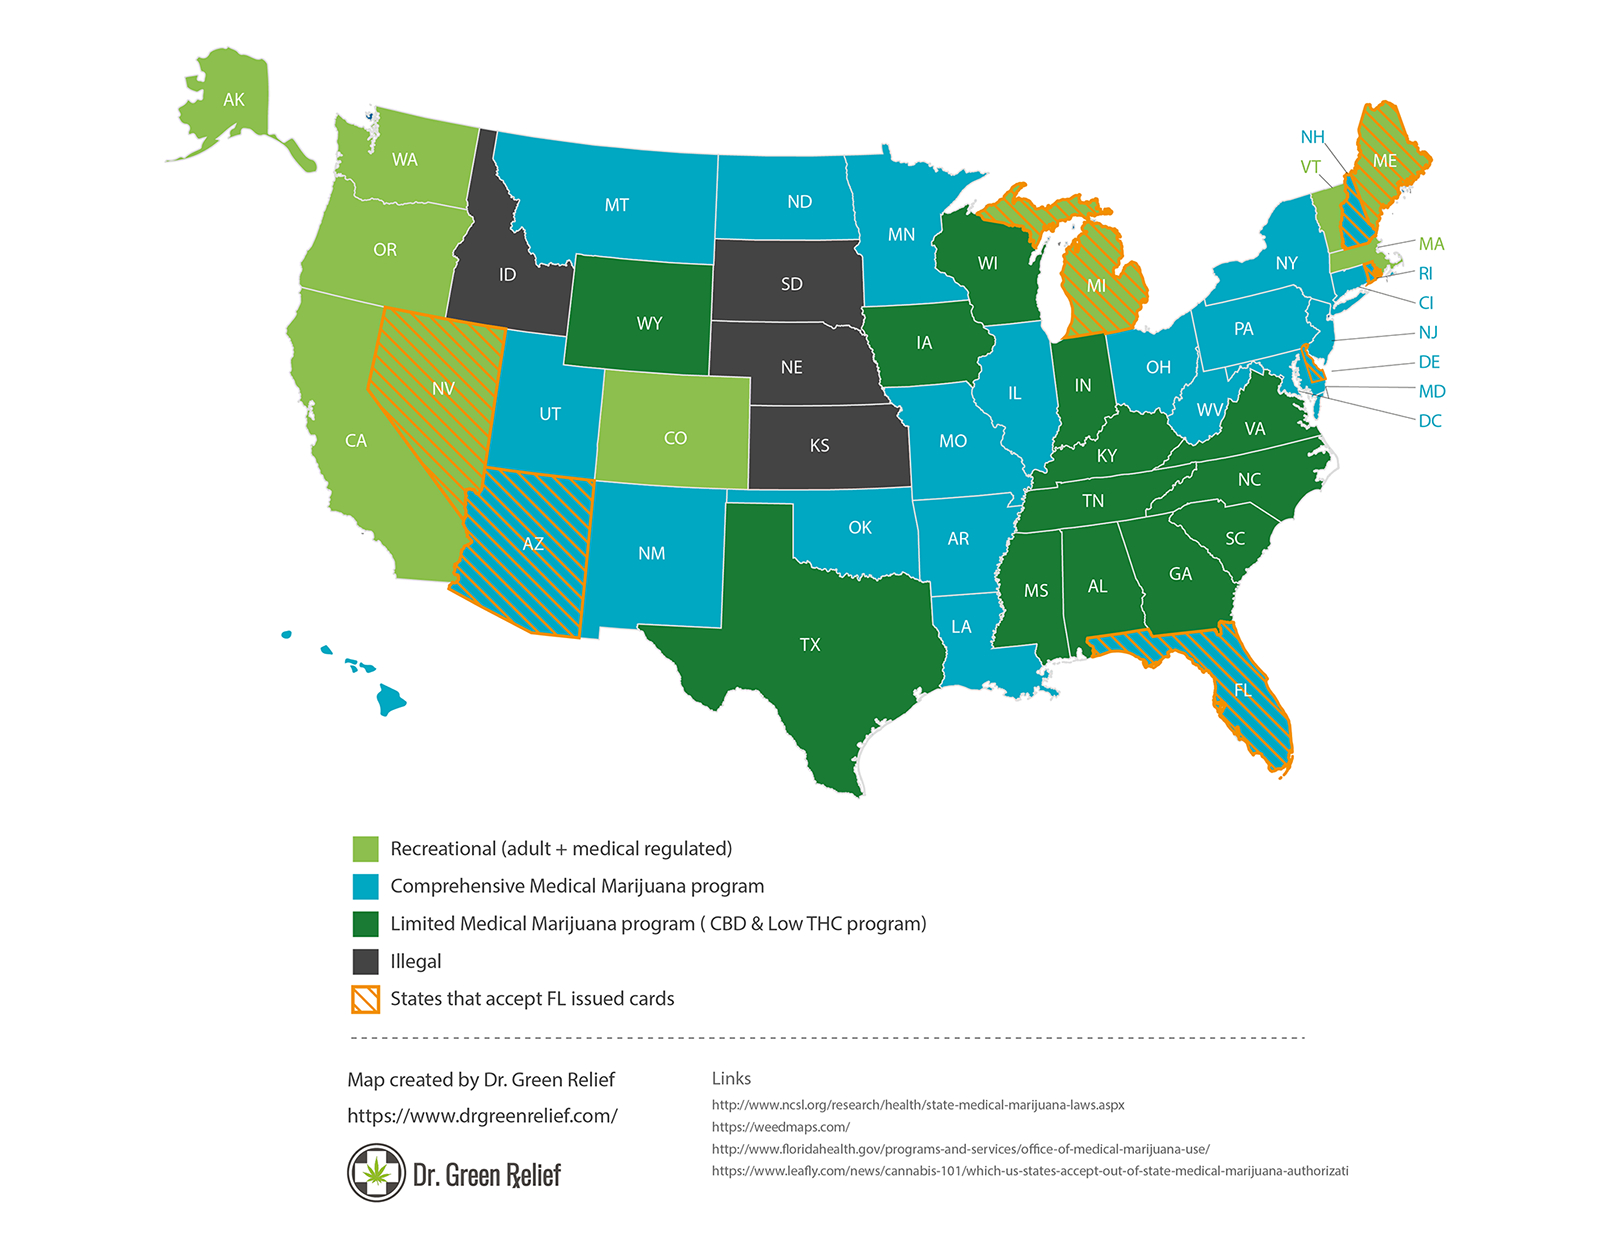 Florida Mmj Card Reciprocity - Which U.s. States Accept Fl Issued Cards - Florida Ccw Reciprocity Map 2018